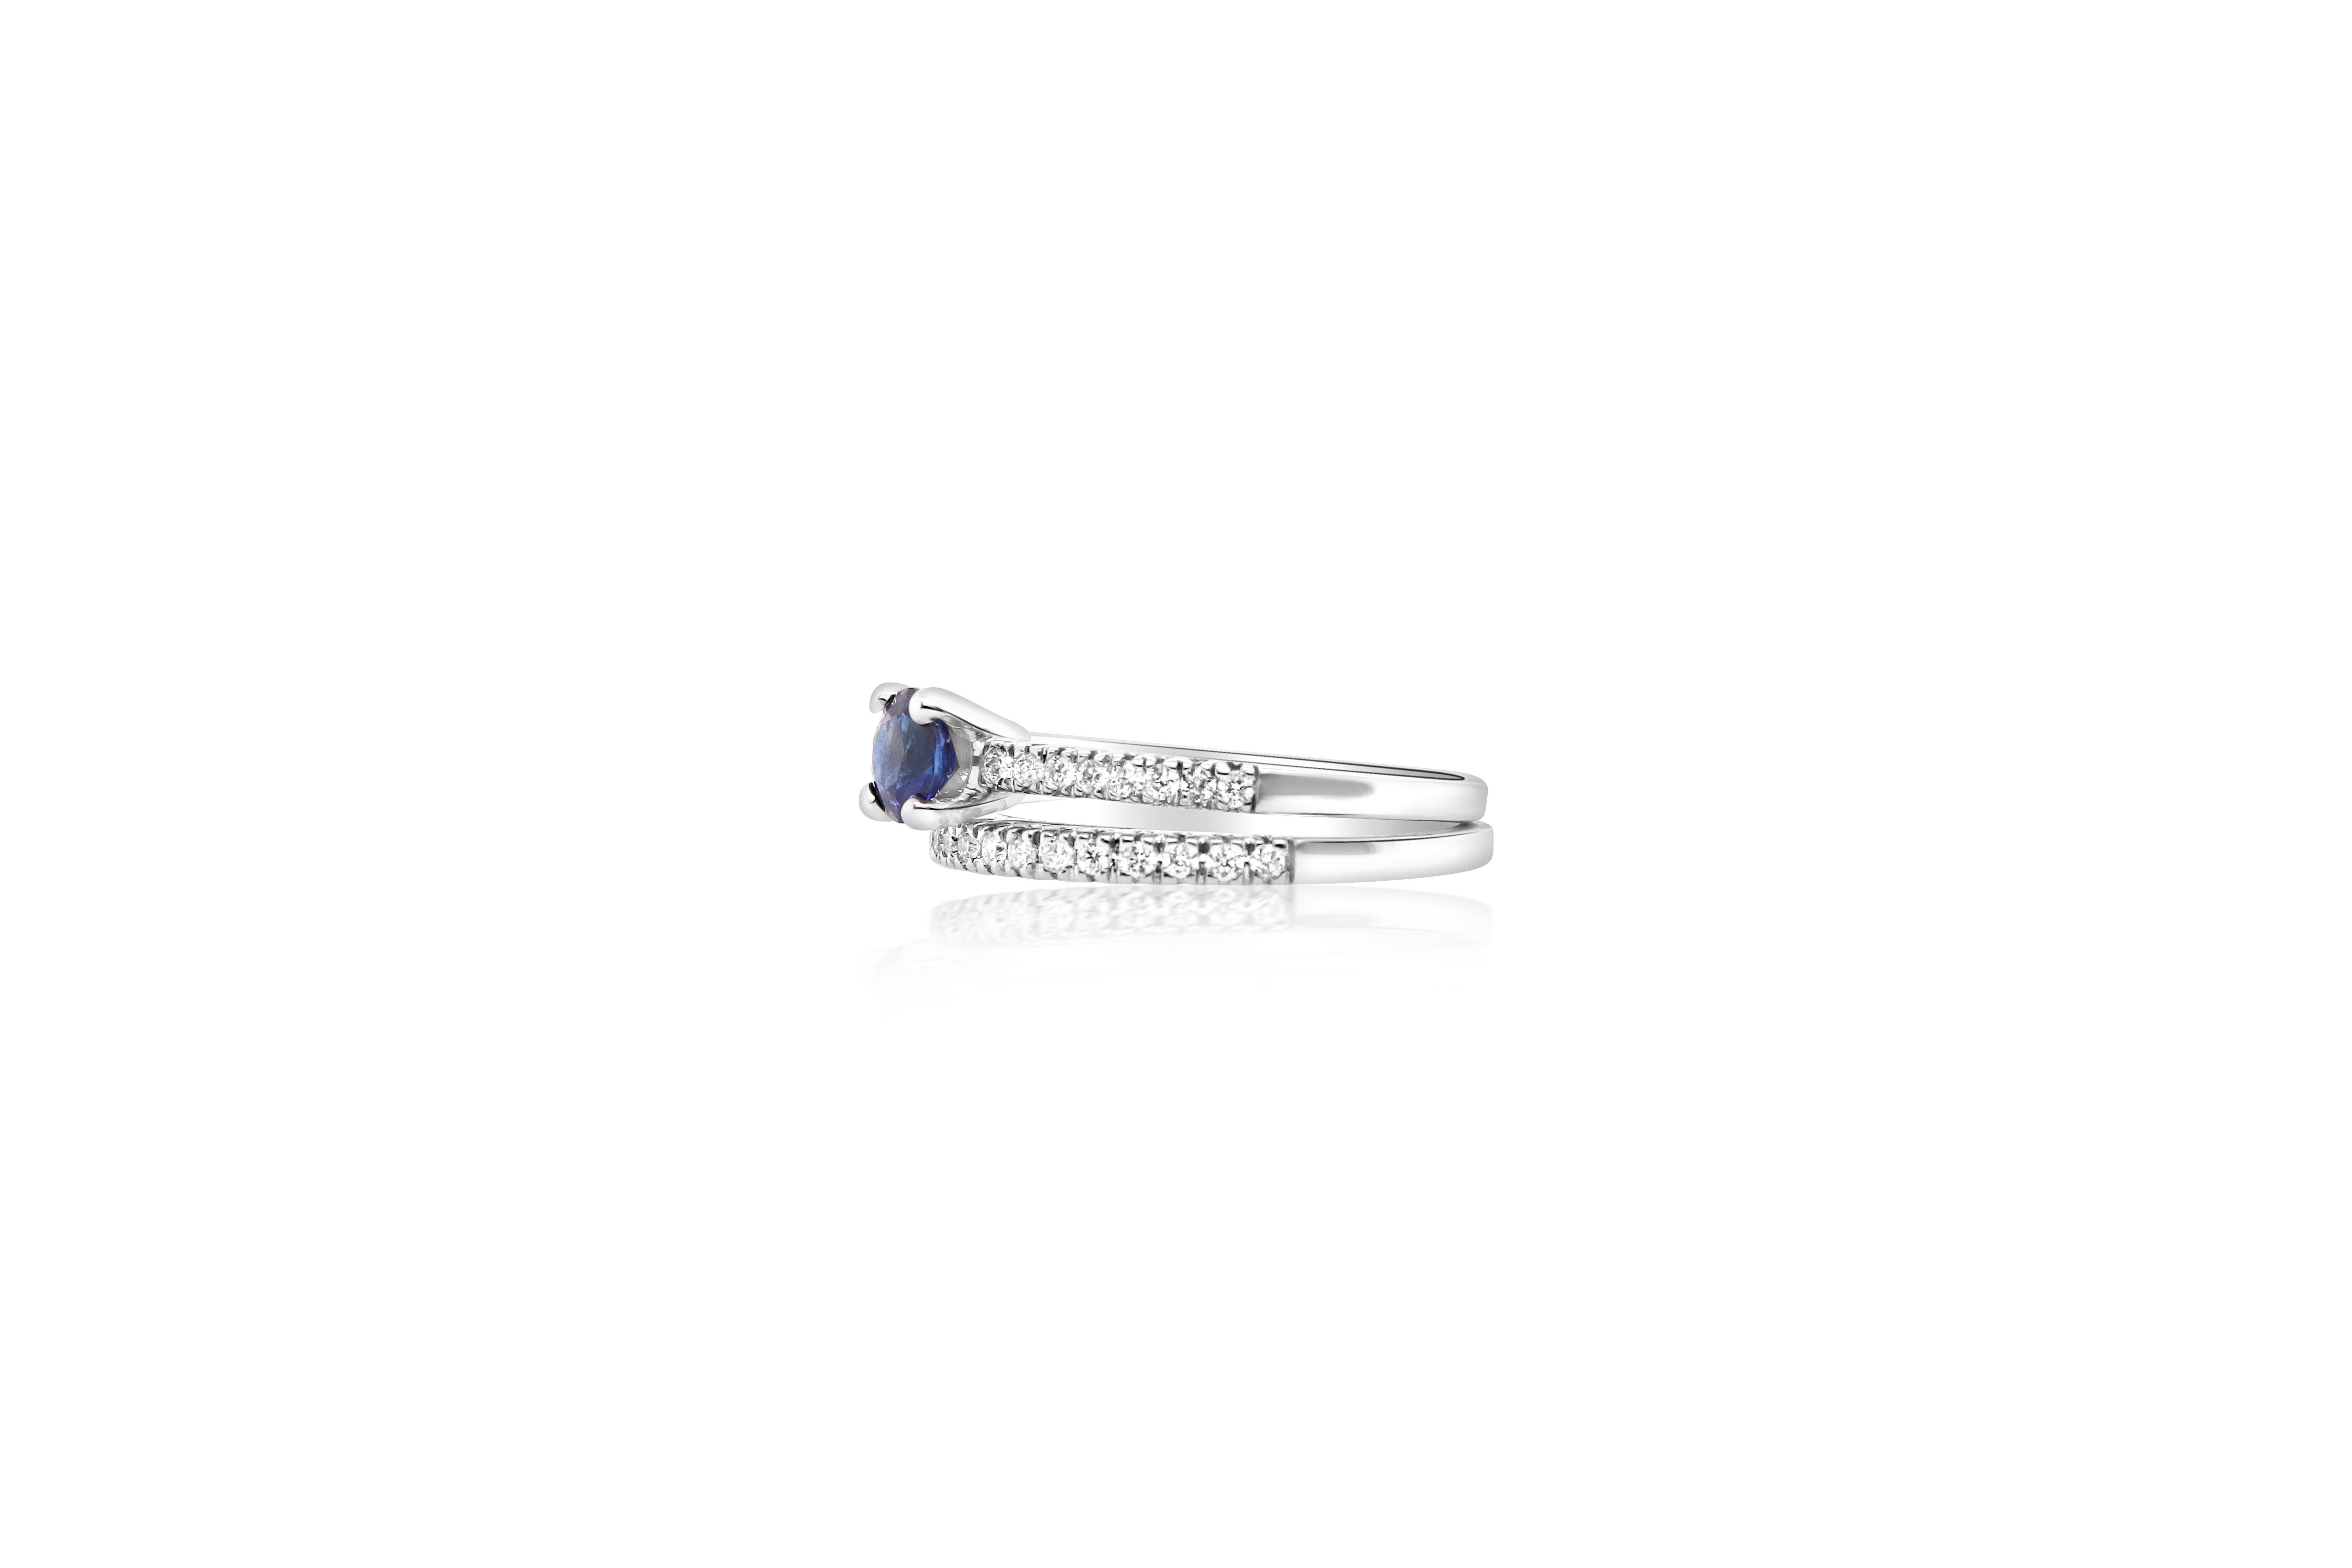 This beautiful 0.54 Carat Blue Sapphire rings a is complemented with a diamond band. Great for stacking or separating to mix and match looks!

Material: 14k White Gold 
Center Stone Details: 0.54 Carat Round Sapphire 
Mounting Diamond Details: 32